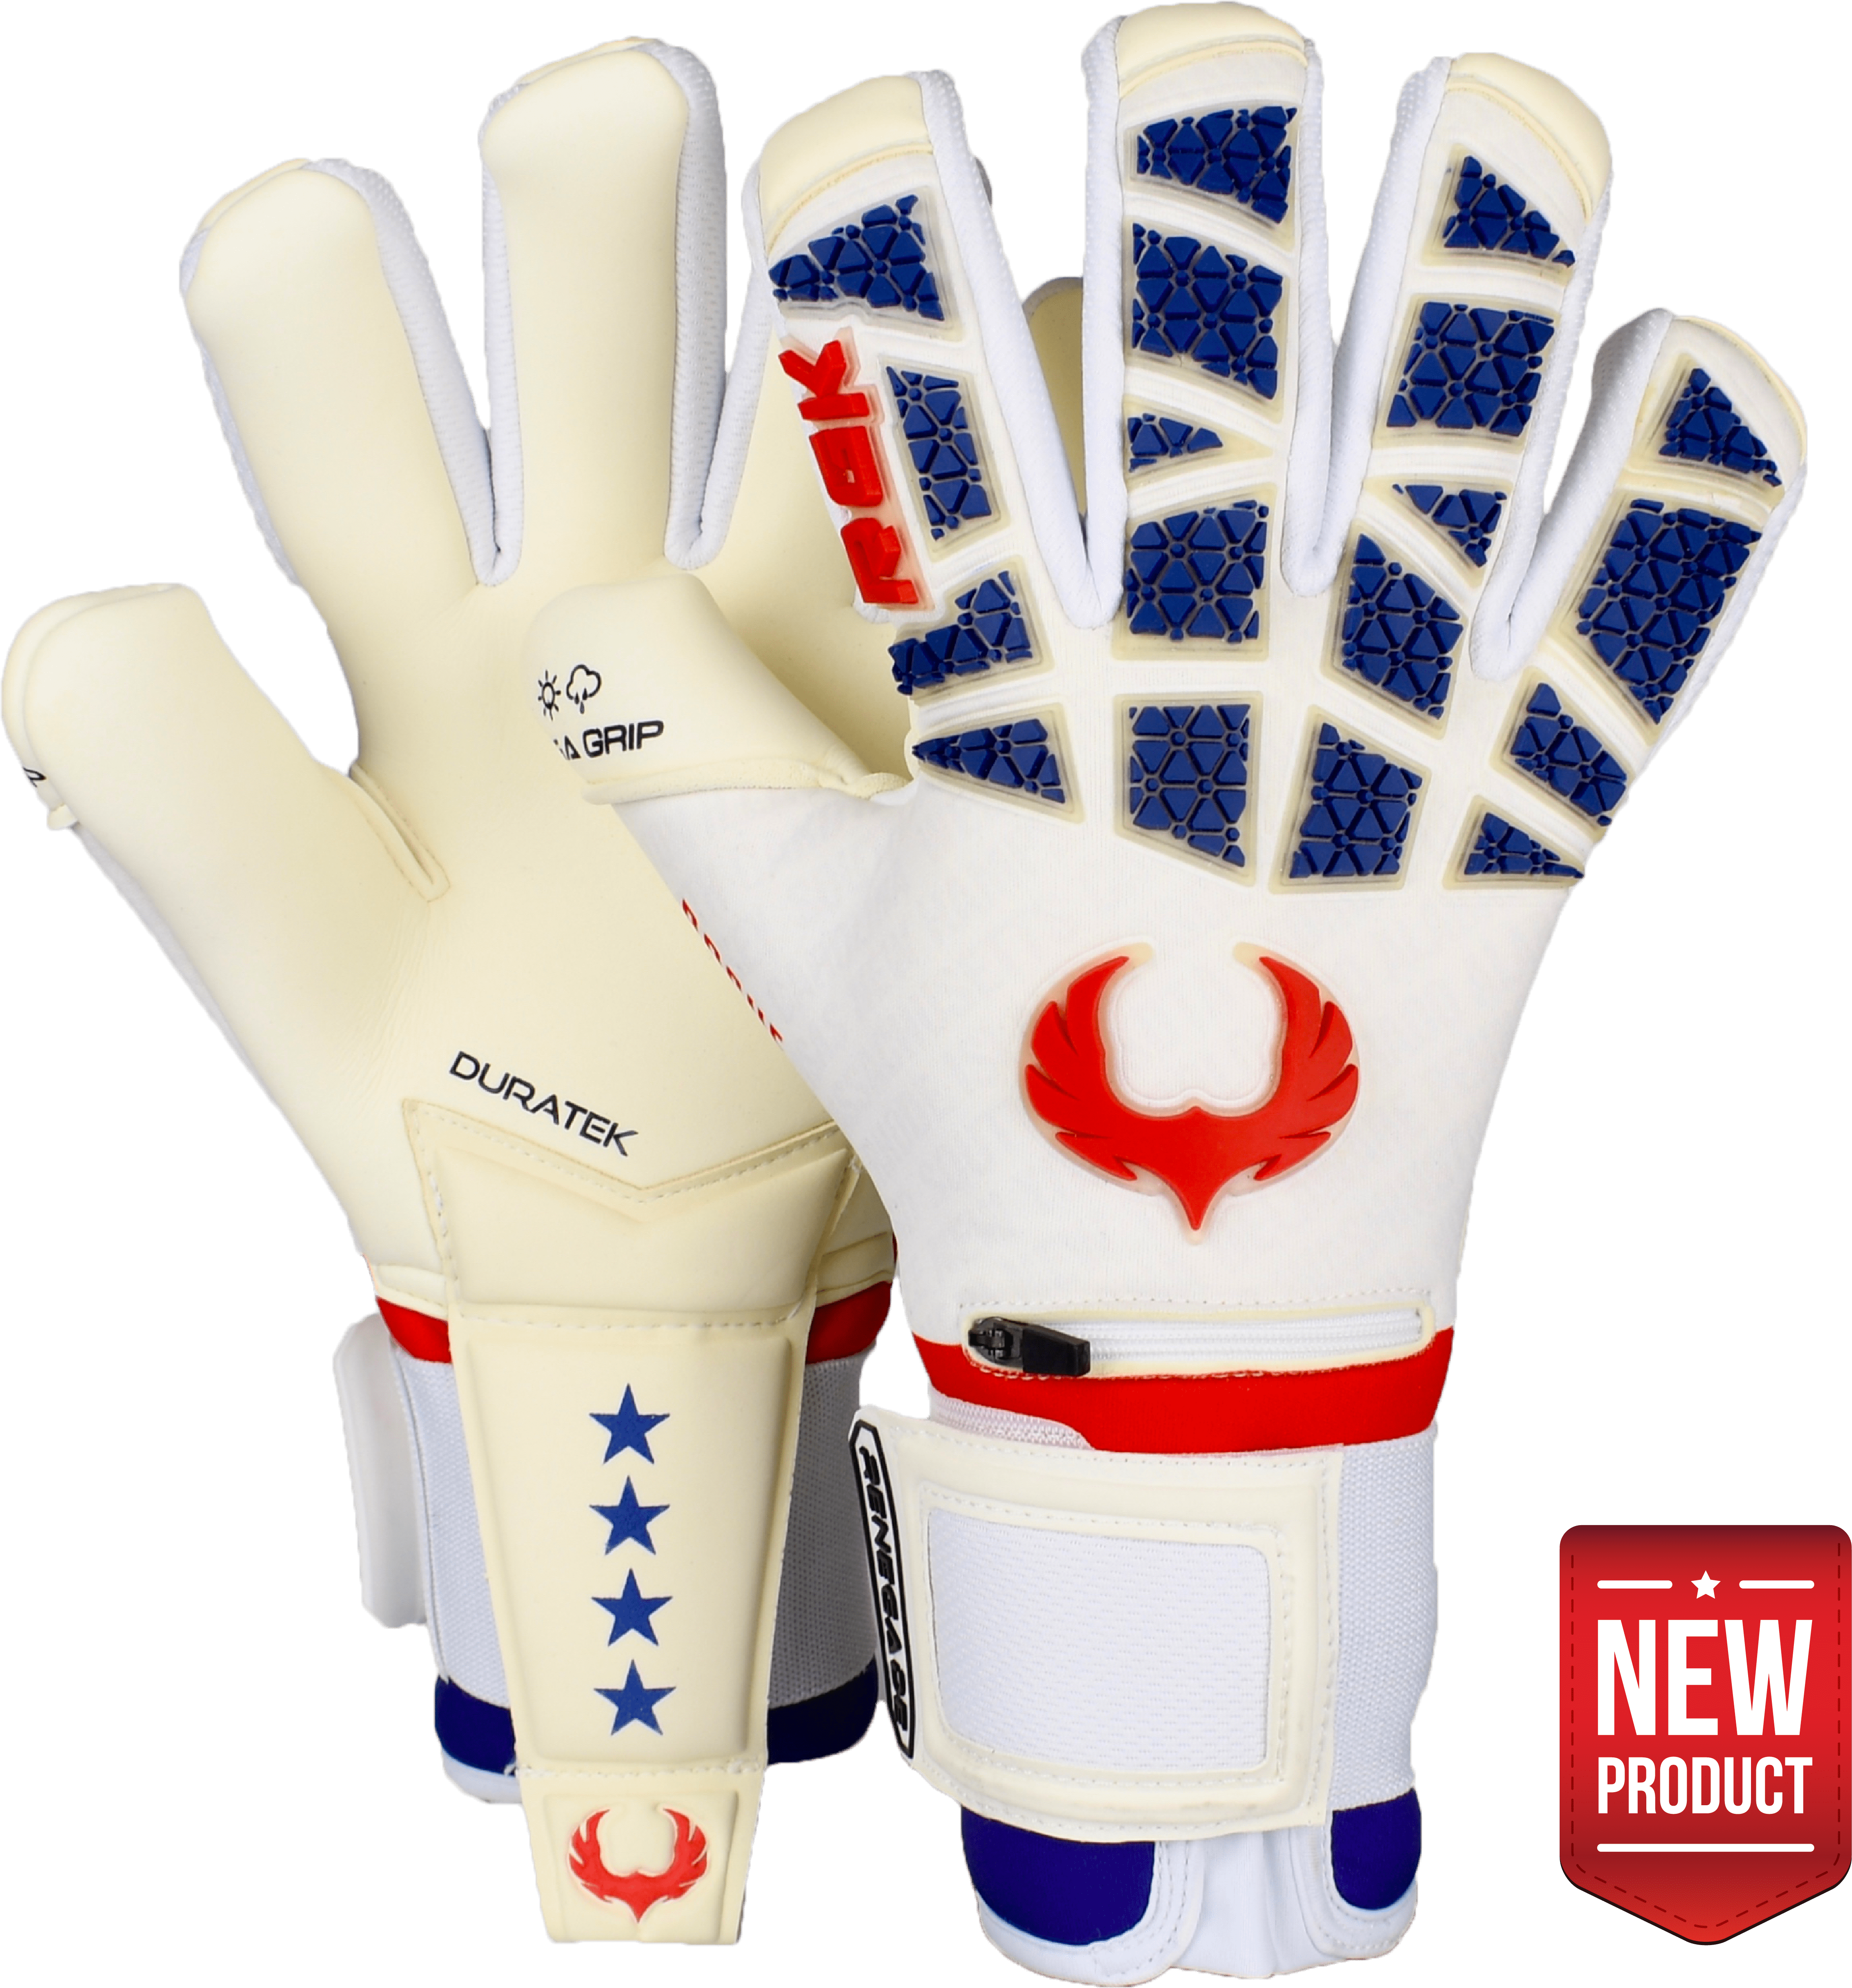 Pro-Tek Fingersaves & 4+3MM Giga Grip Sizes 6-11, Level 4+ Based in The U.S.A. Renegade GK Limited Edition Rogue Soccer Goalie Gloves with Microbe-Guard Only 1500 Made for Each Style